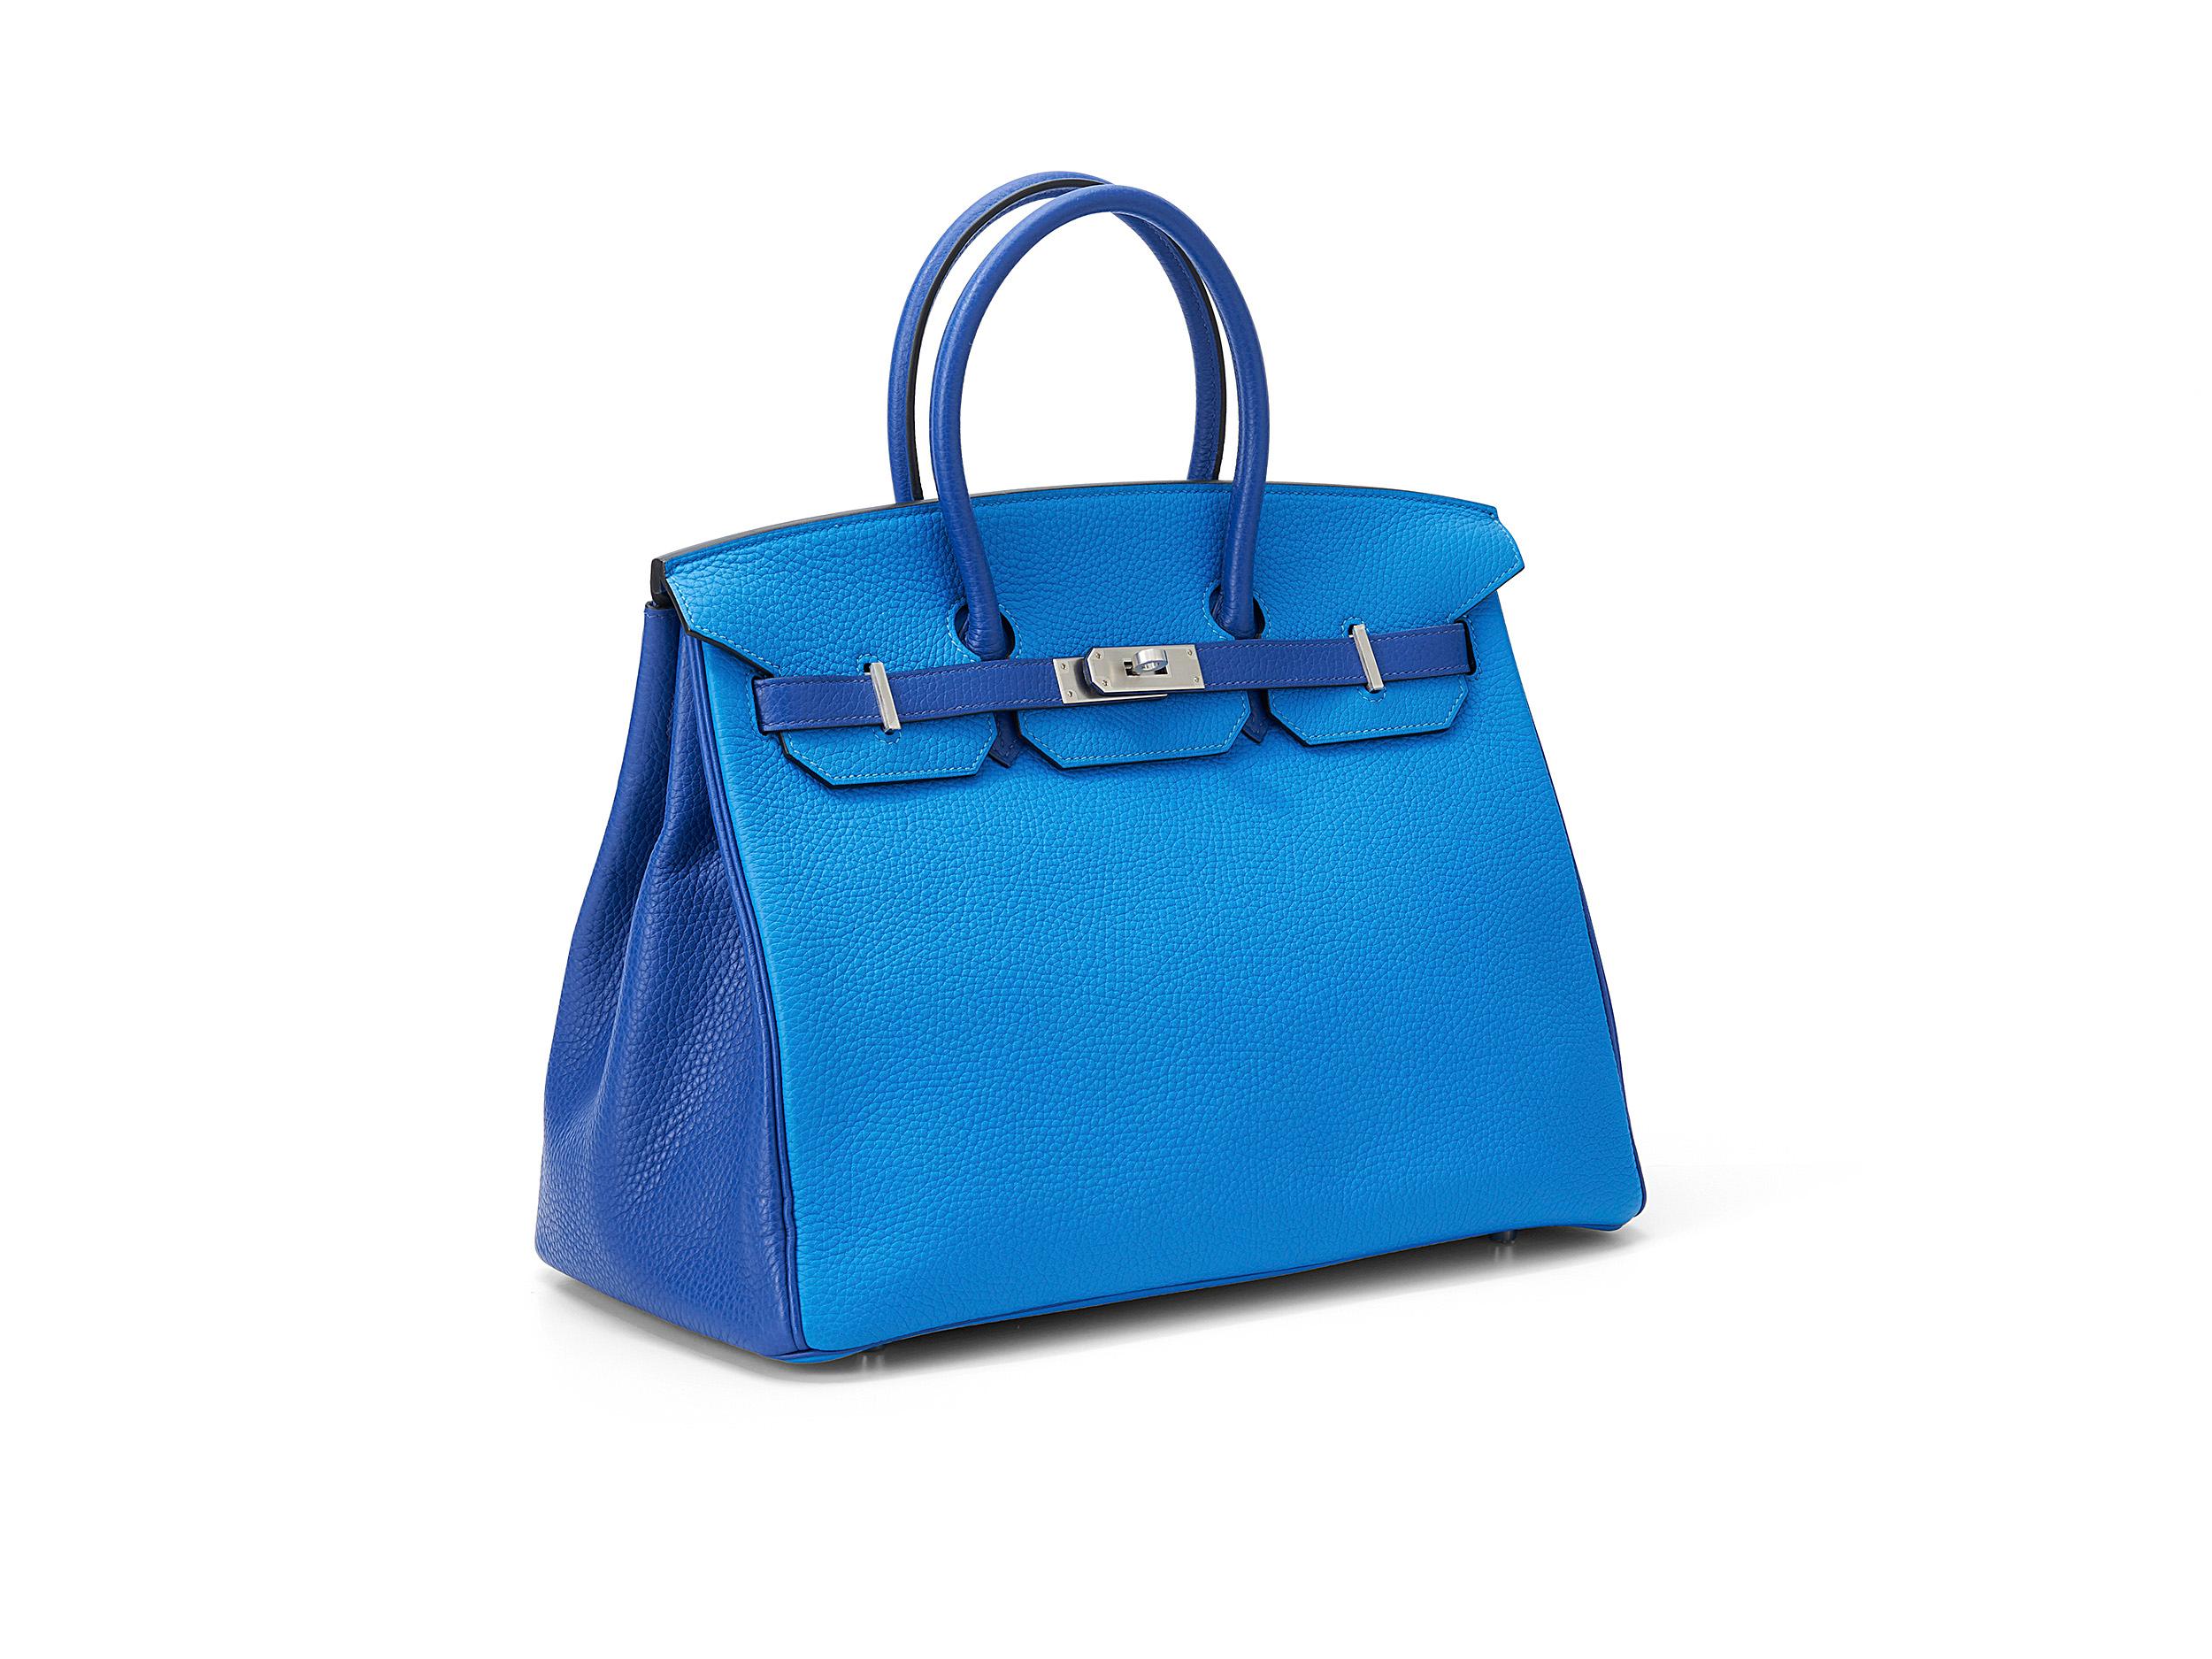 Hermès Birkin HSS 35 in bleu electric/zelige and togo leather with palladium hardware. The bag is in very good condition, with only one slight mark as pictured and comes with Hermès box, Hermès dustbag, clochette and clochette dustbag.  

Bags with